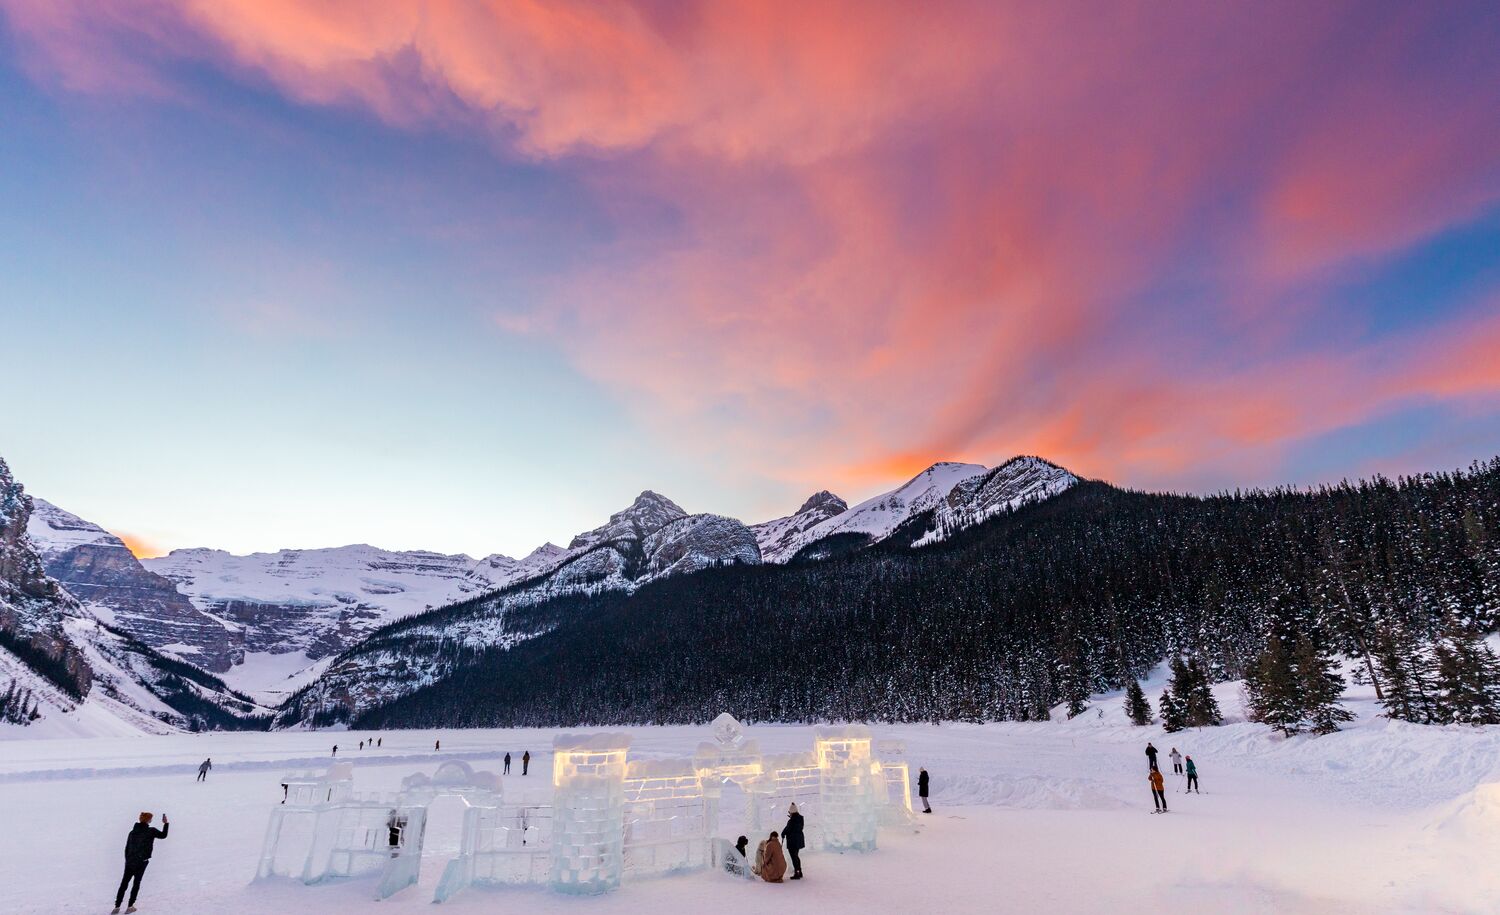 Lake Louise covered in snow with a ice castle in the foreground and orange clouds above mountains in Banff National Park.